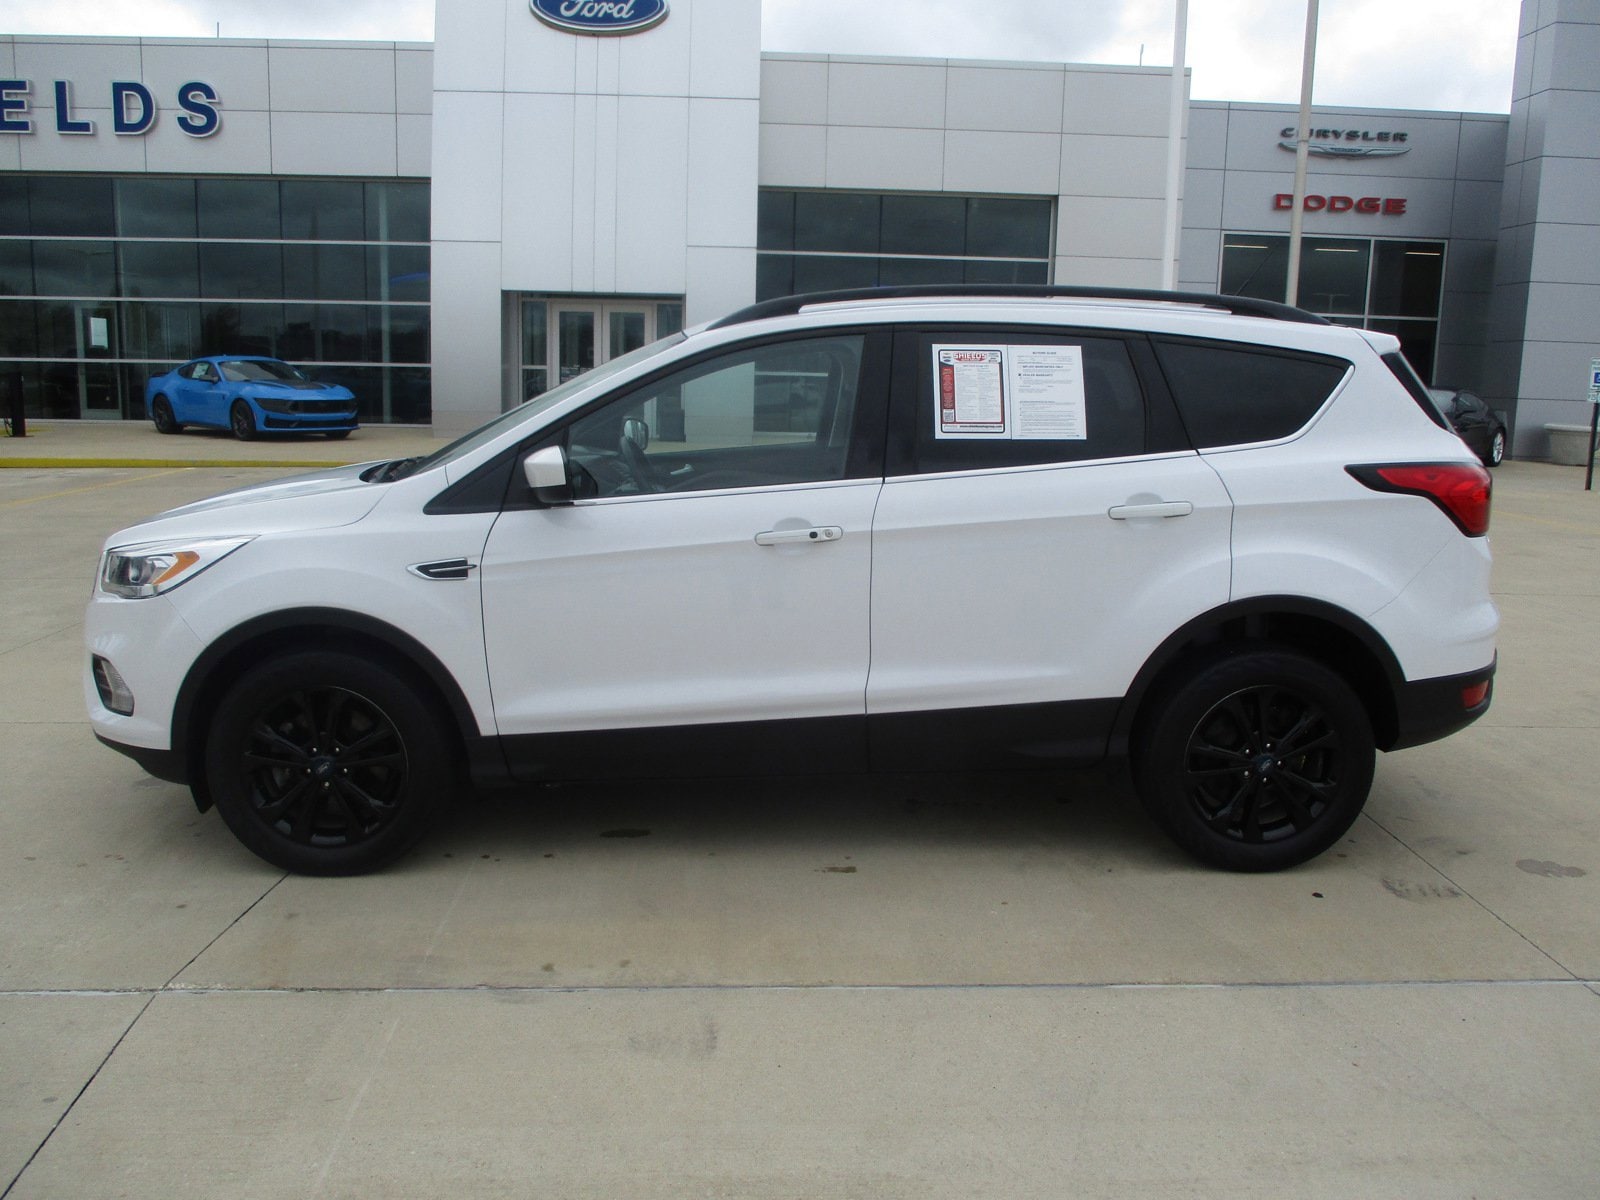 Used 2019 Ford Escape SEL with VIN 1FMCU9HD2KUA04233 for sale in Rantoul, IL